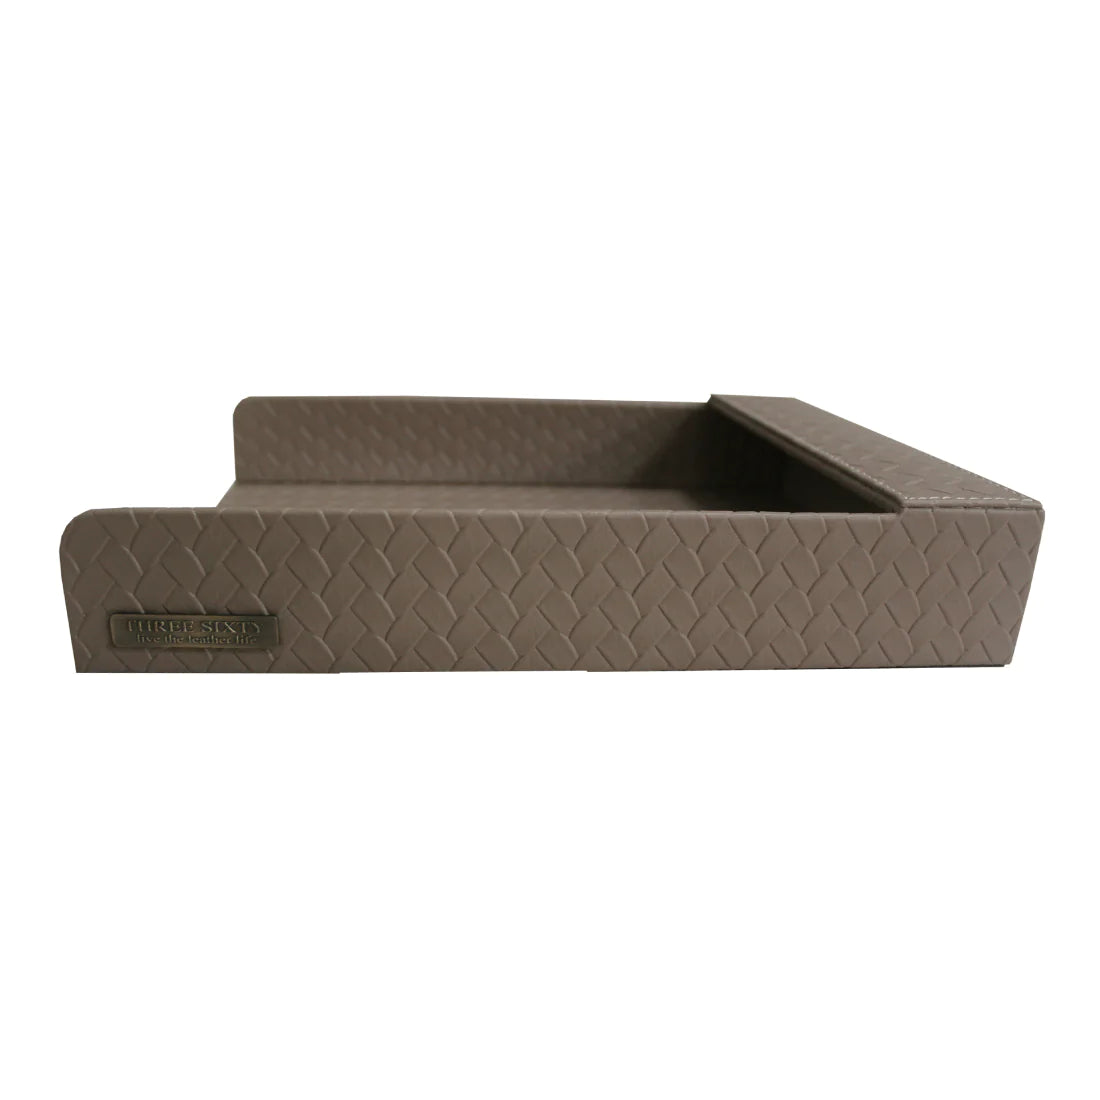 Paper Tray A4 in Faux Leather Beige